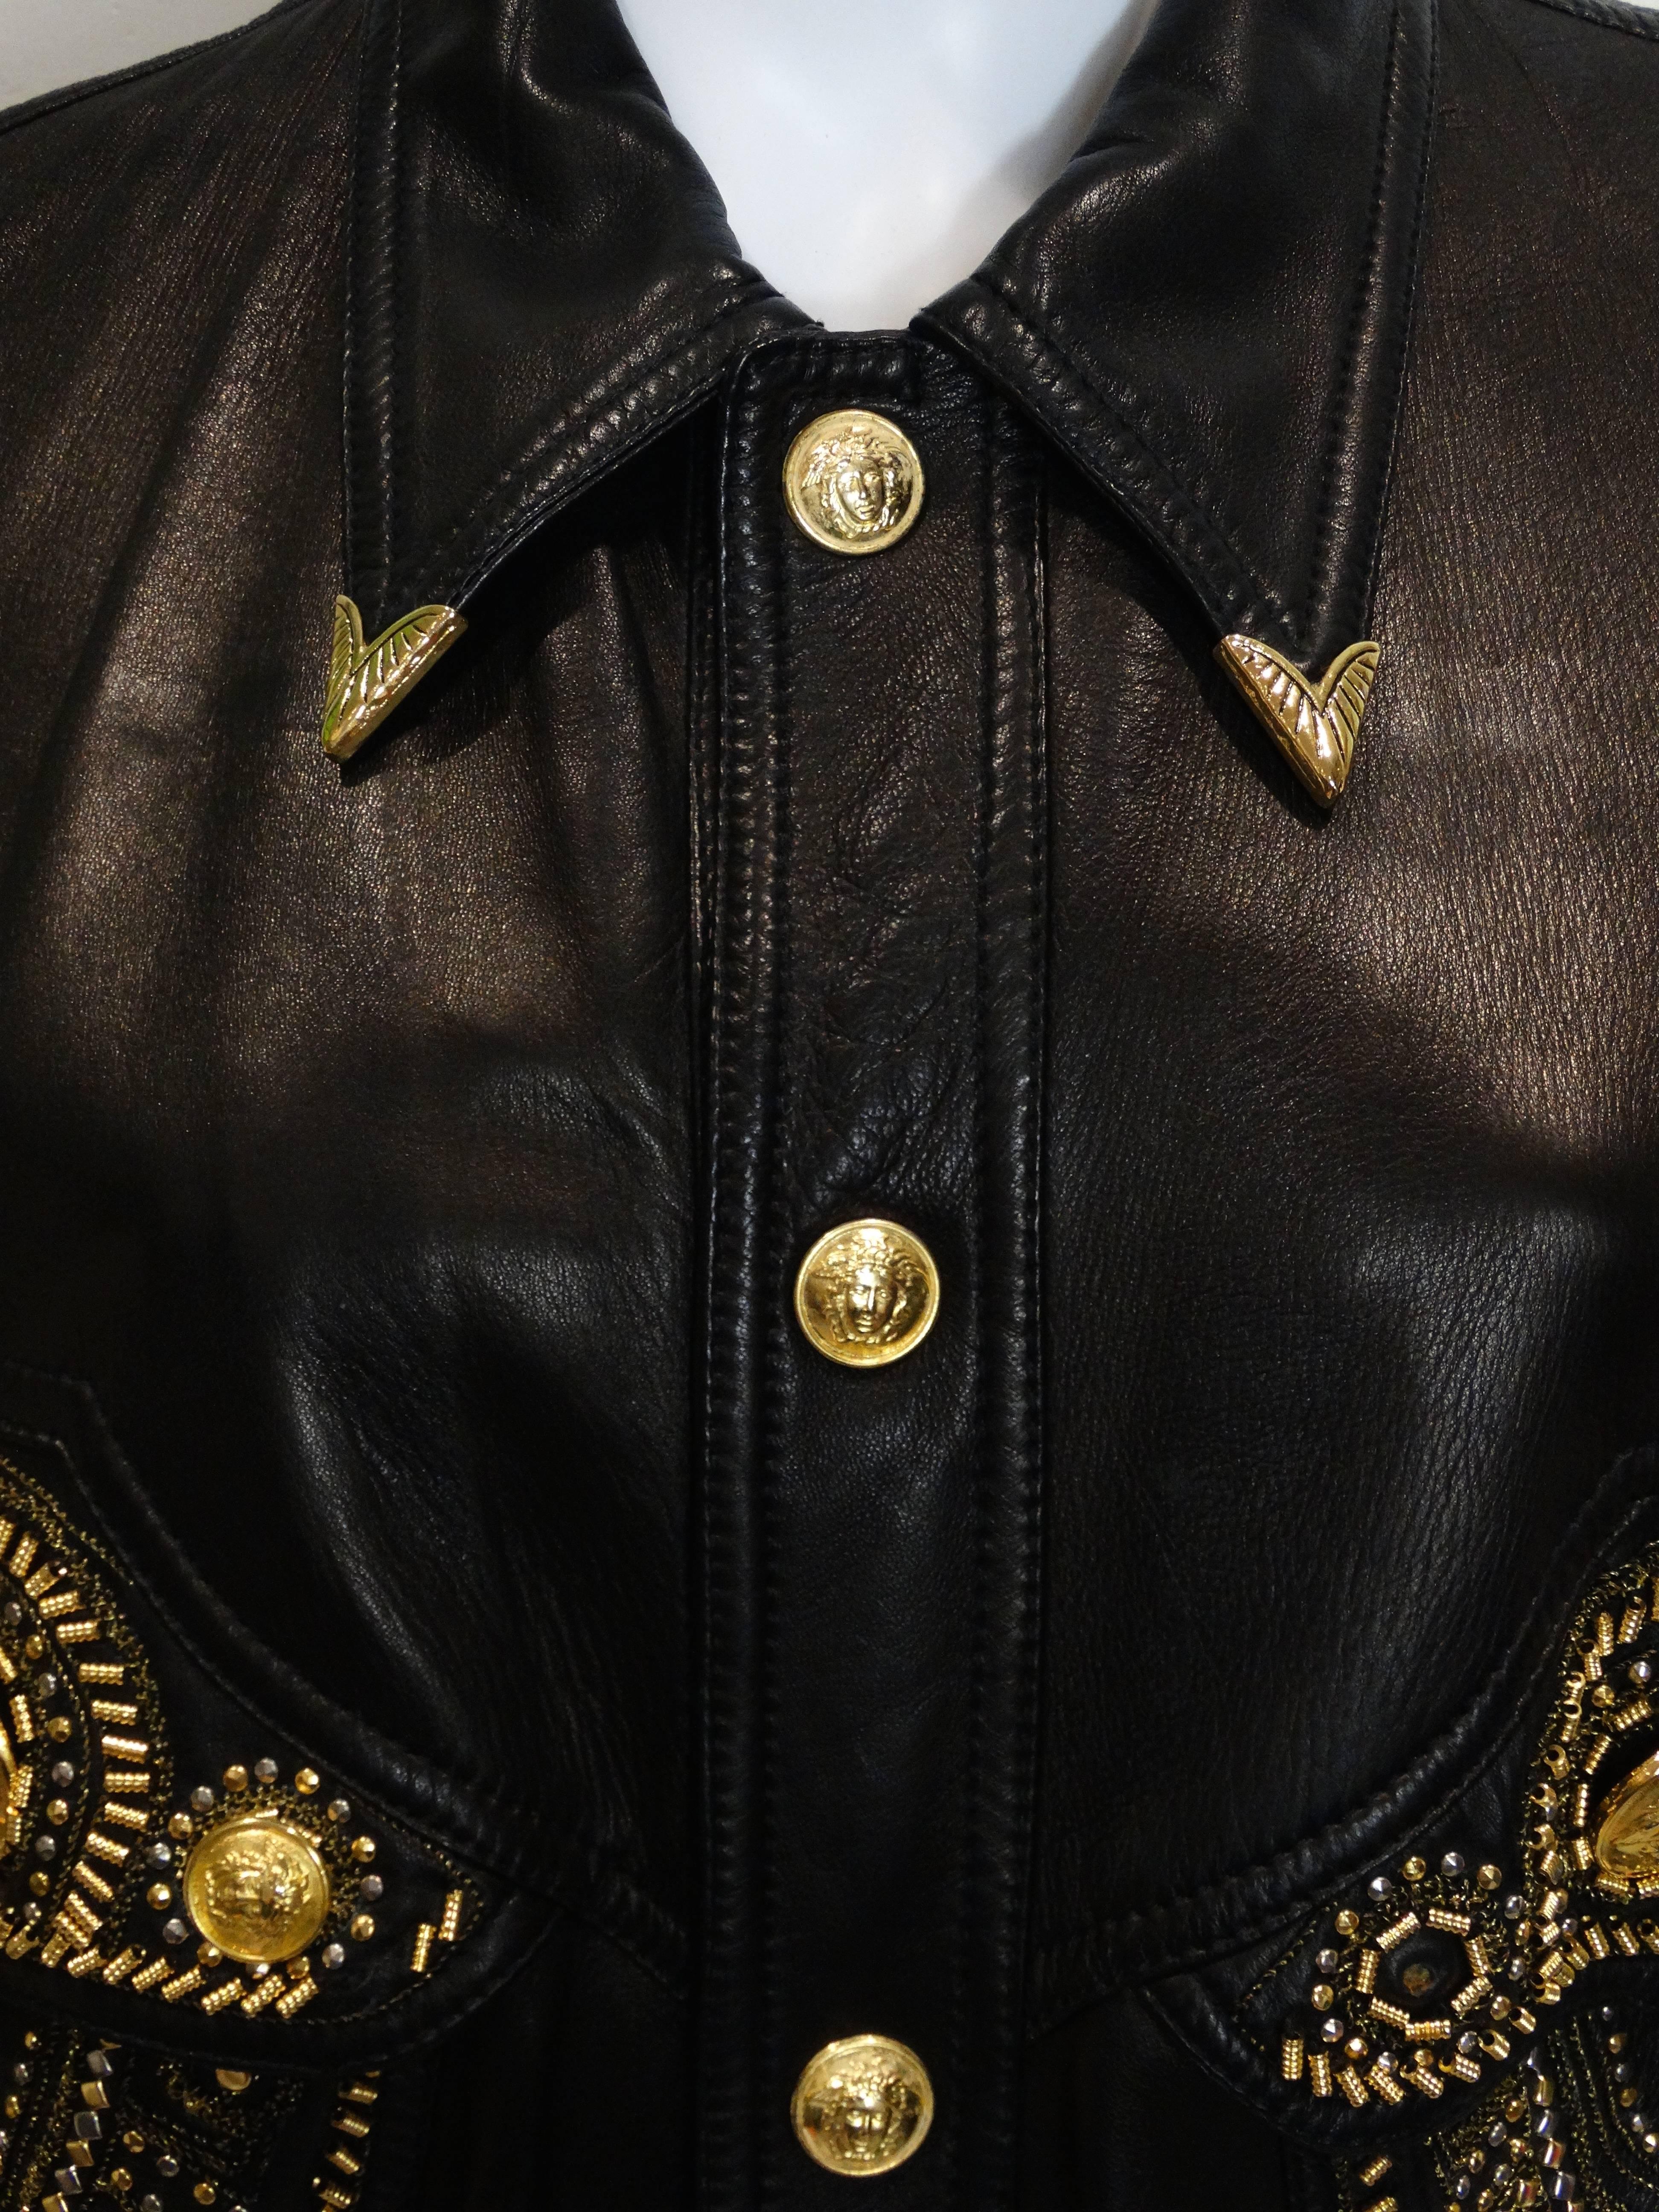 This iconic 1990's cropped black-leather motor cycle jacket is a wonderful example of Gianni Versace's genius. Loving the overload of gold and silver -studs and Medusa head buttons which for Versace reflected beauty, art and philosophy. The cropped